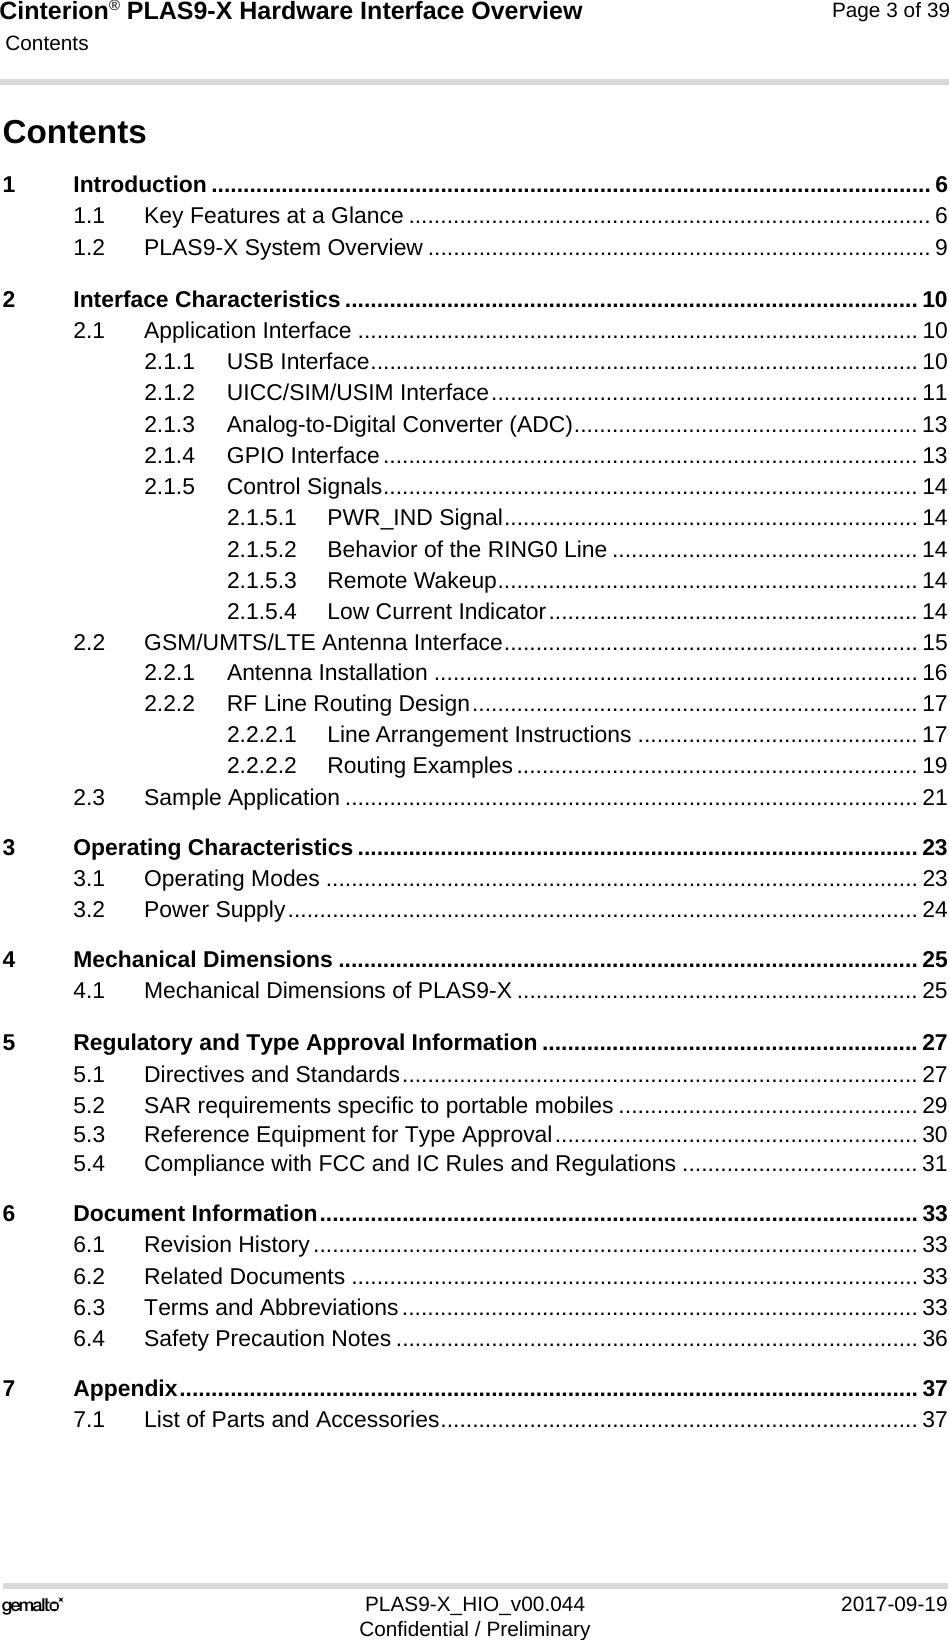 Cinterion® PLAS9-X Hardware Interface Overview Contents39PLAS9-X_HIO_v00.044 2017-09-19Confidential / PreliminaryPage 3 of 39Contents1 Introduction ................................................................................................................. 61.1 Key Features at a Glance .................................................................................. 61.2 PLAS9-X System Overview ............................................................................... 92 Interface Characteristics .......................................................................................... 102.1 Application Interface ........................................................................................ 102.1.1 USB Interface...................................................................................... 102.1.2 UICC/SIM/USIM Interface................................................................... 112.1.3 Analog-to-Digital Converter (ADC)...................................................... 132.1.4 GPIO Interface.................................................................................... 132.1.5 Control Signals.................................................................................... 142.1.5.1 PWR_IND Signal................................................................. 142.1.5.2 Behavior of the RING0 Line ................................................ 142.1.5.3 Remote Wakeup.................................................................. 142.1.5.4 Low Current Indicator.......................................................... 142.2 GSM/UMTS/LTE Antenna Interface................................................................. 152.2.1 Antenna Installation ............................................................................ 162.2.2 RF Line Routing Design...................................................................... 172.2.2.1 Line Arrangement Instructions ............................................ 172.2.2.2 Routing Examples............................................................... 192.3 Sample Application .......................................................................................... 213 Operating Characteristics ........................................................................................ 233.1 Operating Modes ............................................................................................. 233.2 Power Supply................................................................................................... 244 Mechanical Dimensions ........................................................................................... 254.1 Mechanical Dimensions of PLAS9-X ............................................................... 255 Regulatory and Type Approval Information ........................................................... 275.1 Directives and Standards................................................................................. 275.2 SAR requirements specific to portable mobiles ............................................... 295.3 Reference Equipment for Type Approval......................................................... 305.4 Compliance with FCC and IC Rules and Regulations ..................................... 316 Document Information.............................................................................................. 336.1 Revision History............................................................................................... 336.2 Related Documents ......................................................................................... 336.3 Terms and Abbreviations................................................................................. 336.4 Safety Precaution Notes .................................................................................. 367 Appendix.................................................................................................................... 377.1 List of Parts and Accessories........................................................................... 37